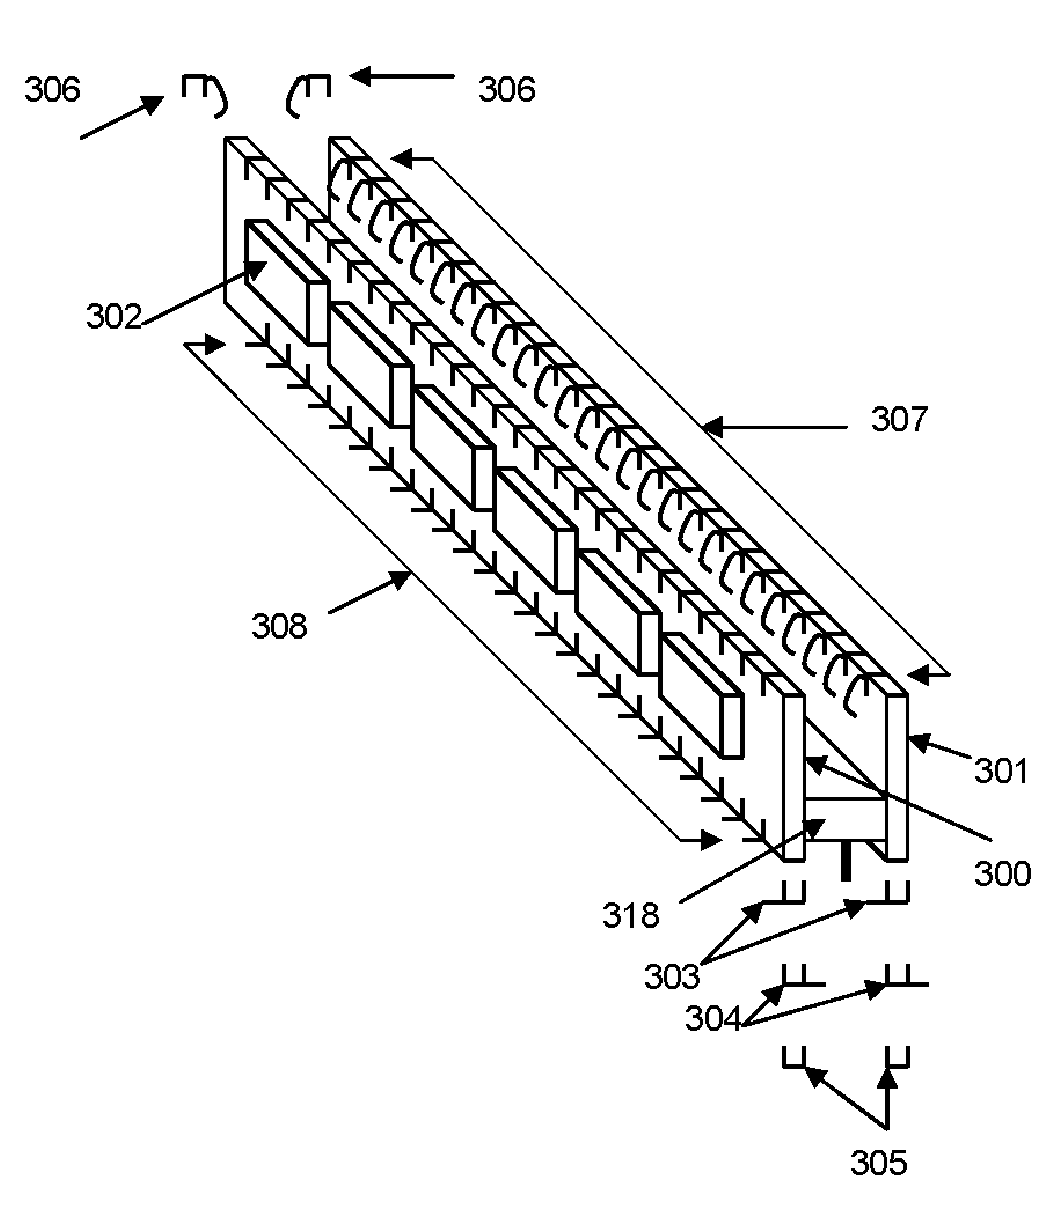 Active Dual in Line Memory Module Connector with Re-driven Propagated Signals